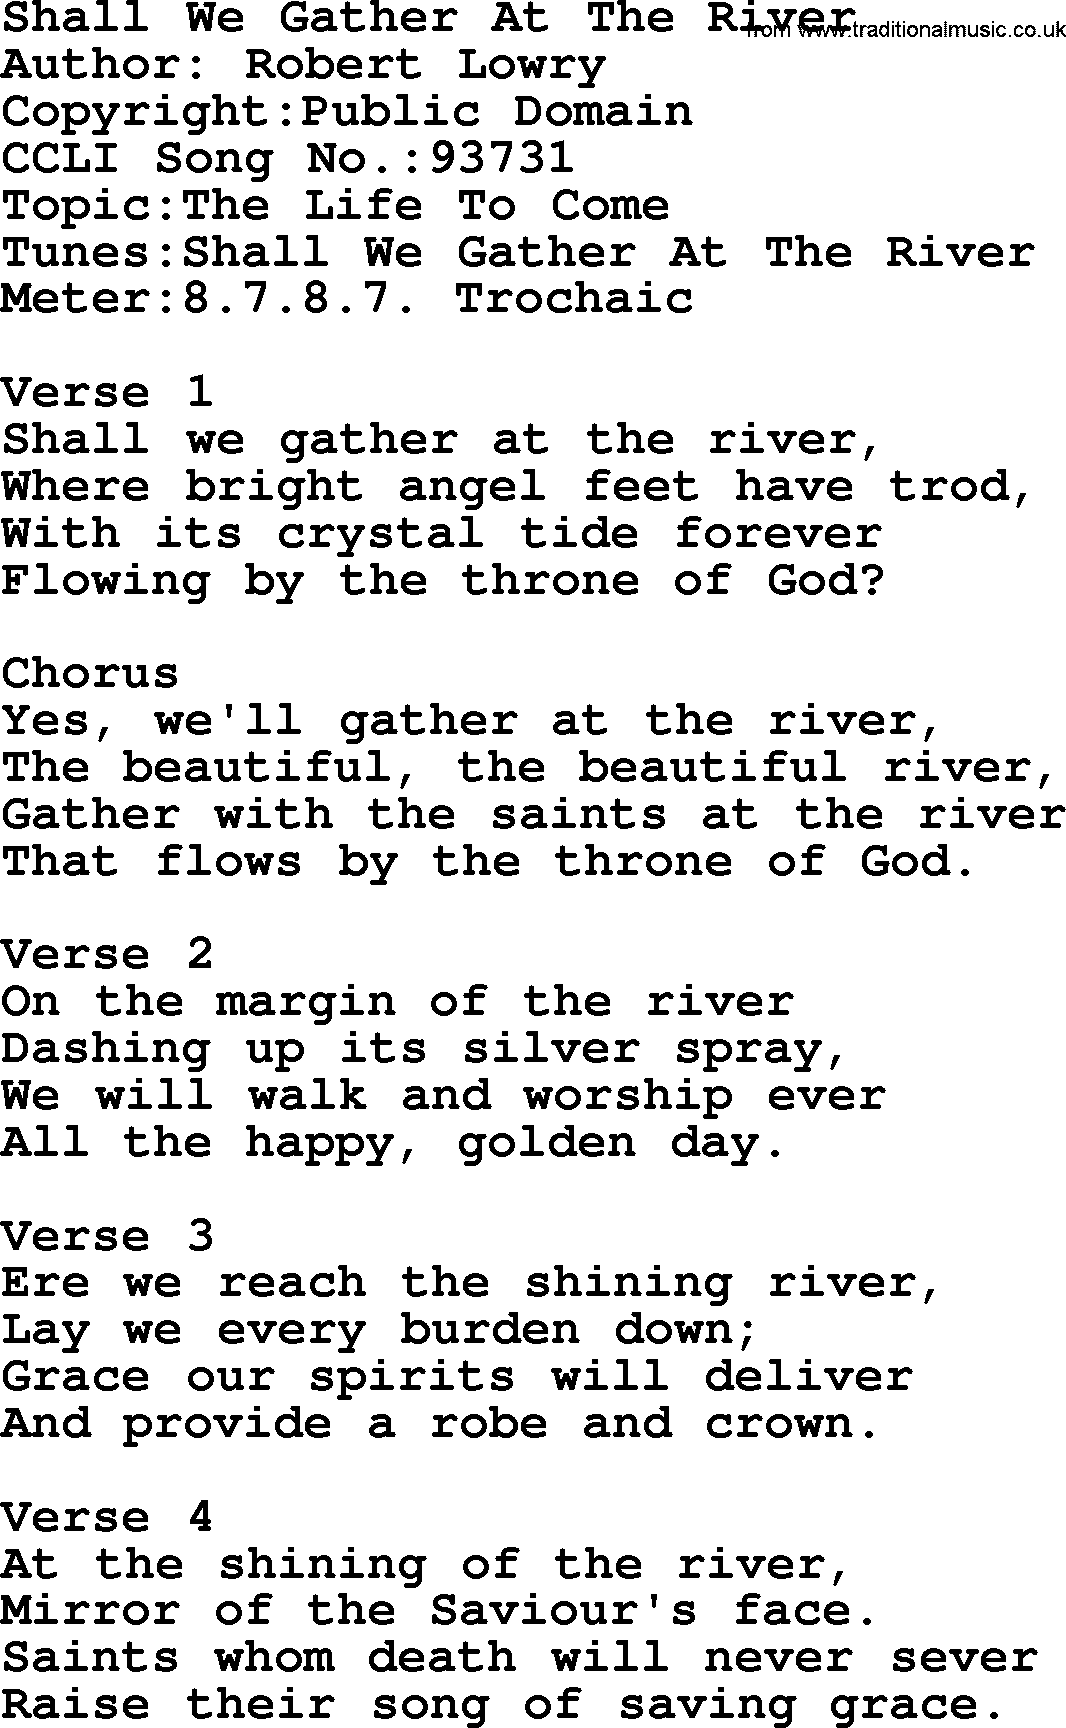 A collection of 500+ most sung Christian church hymns and songs, title: Shall We Gather At The River, lyrics, PPTX and PDF